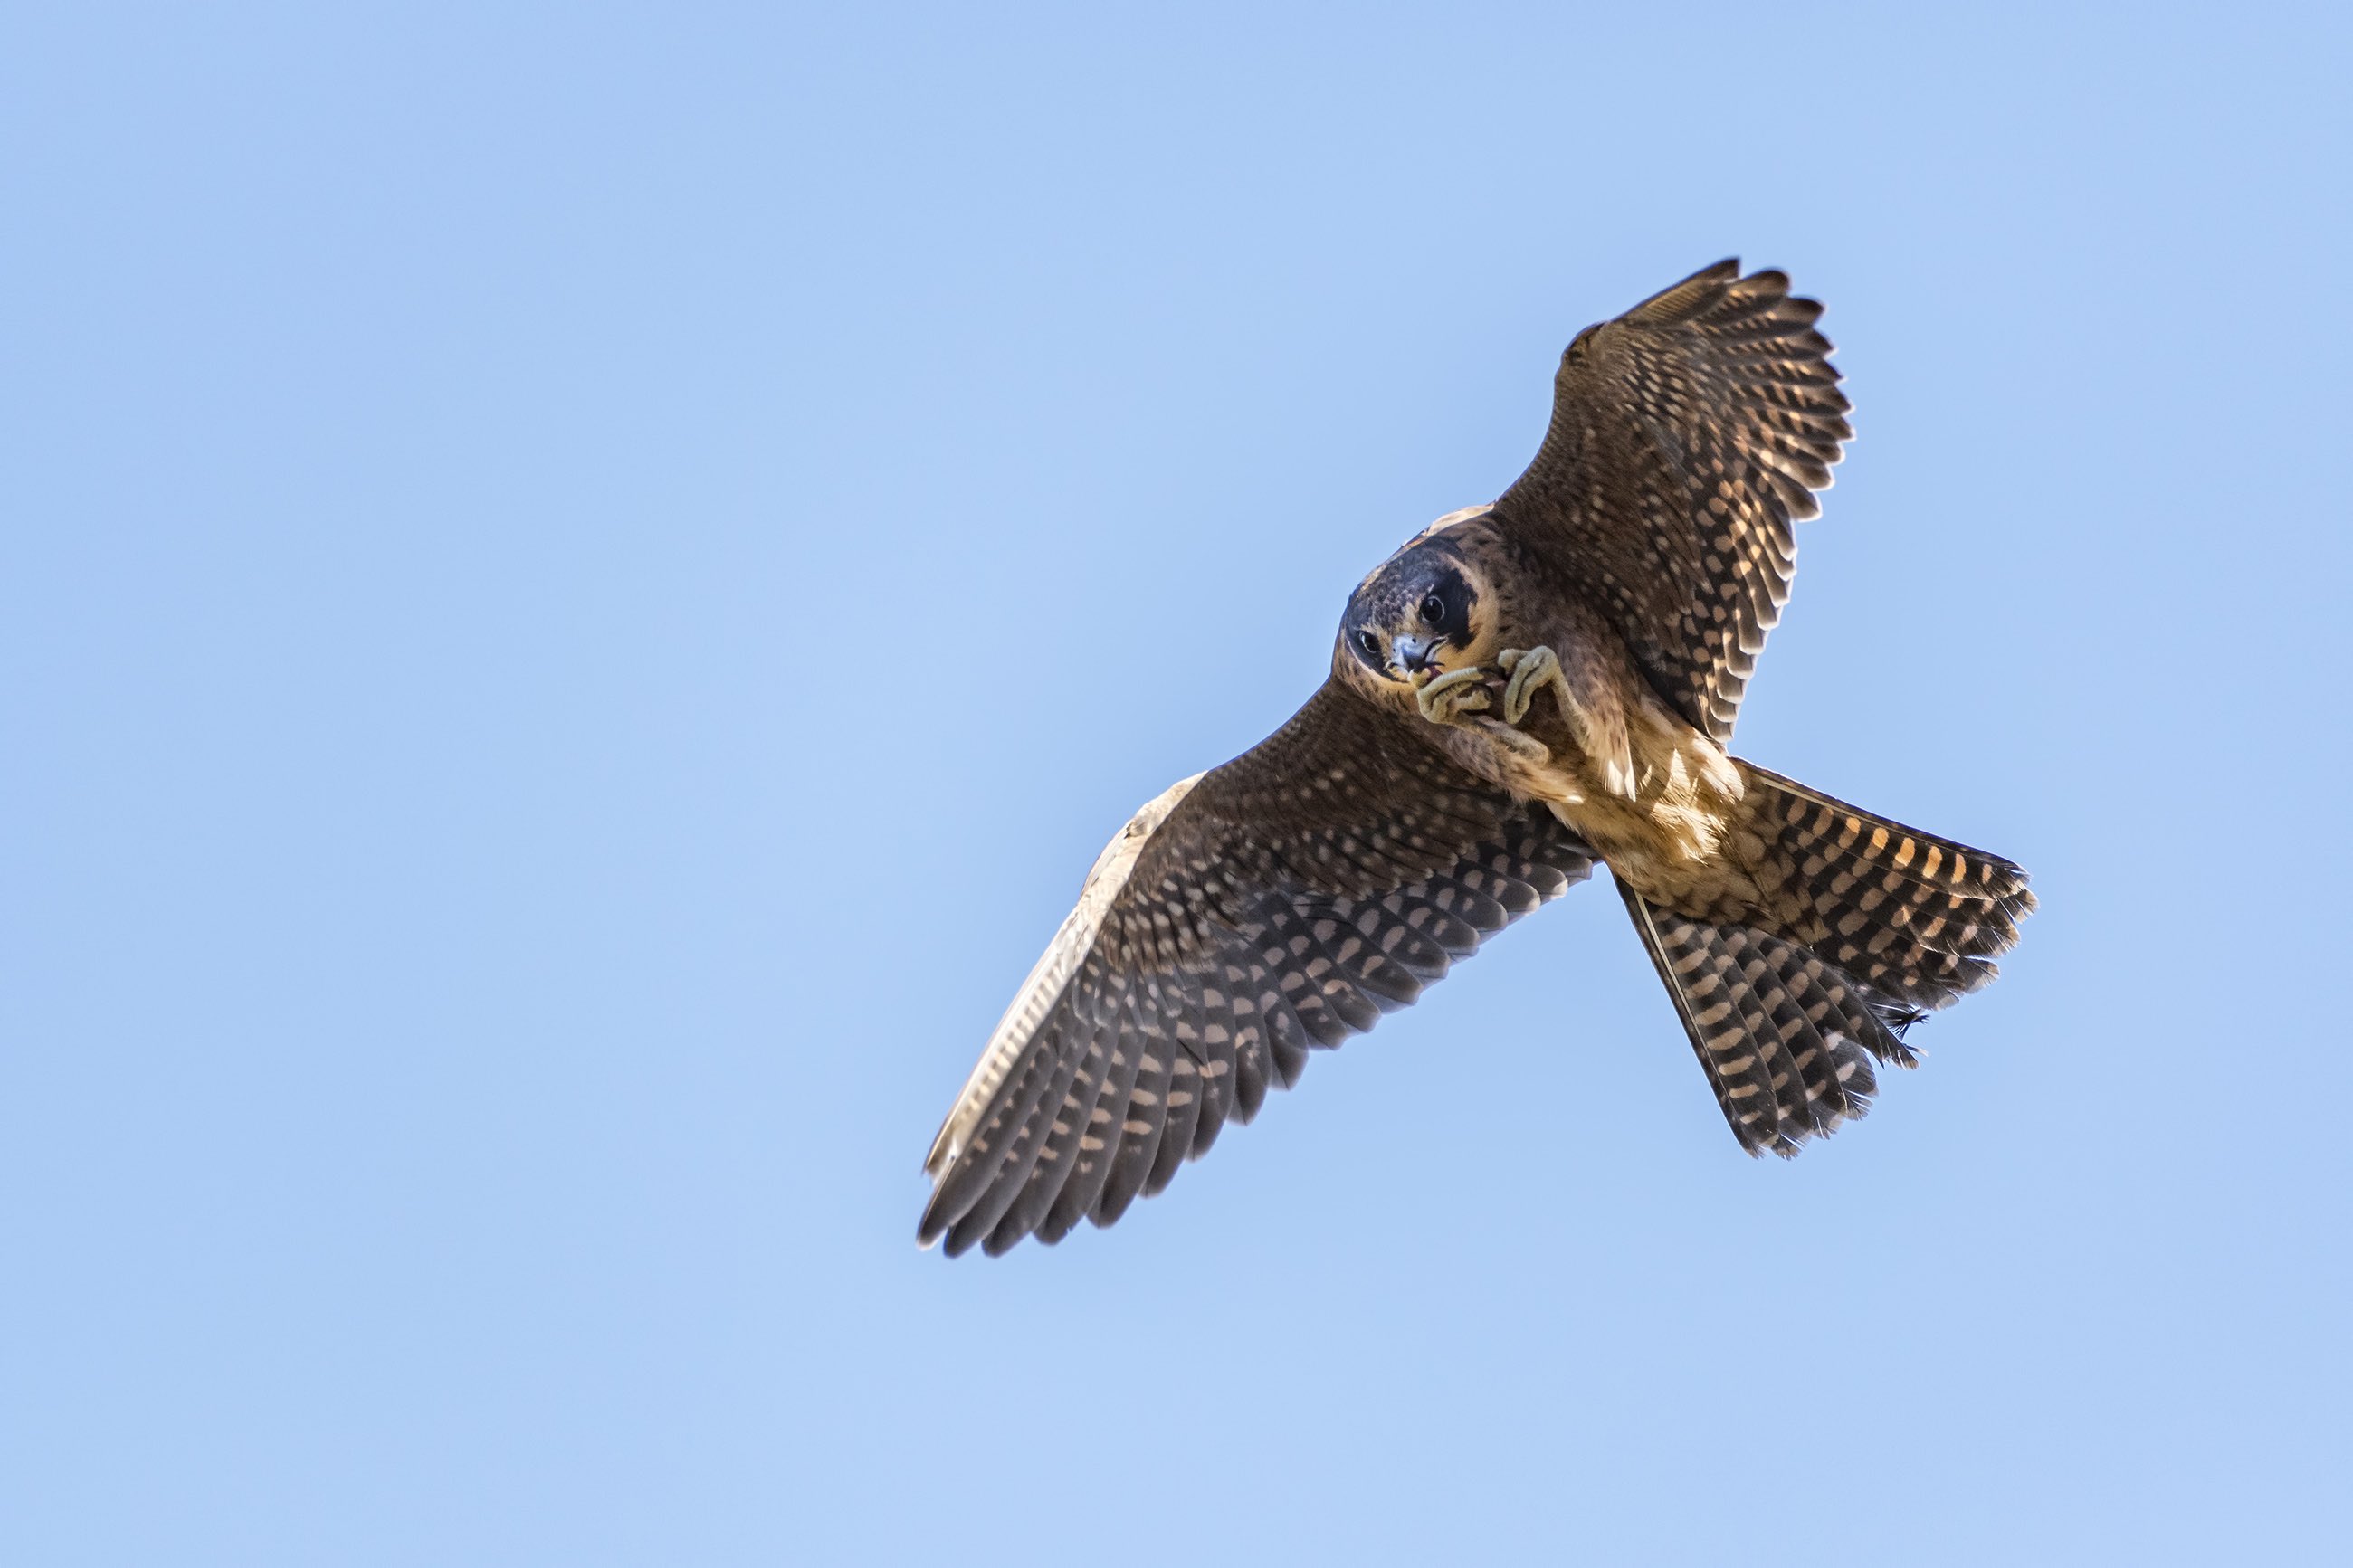 Down the wind: the ancient art of falconry put to a new use